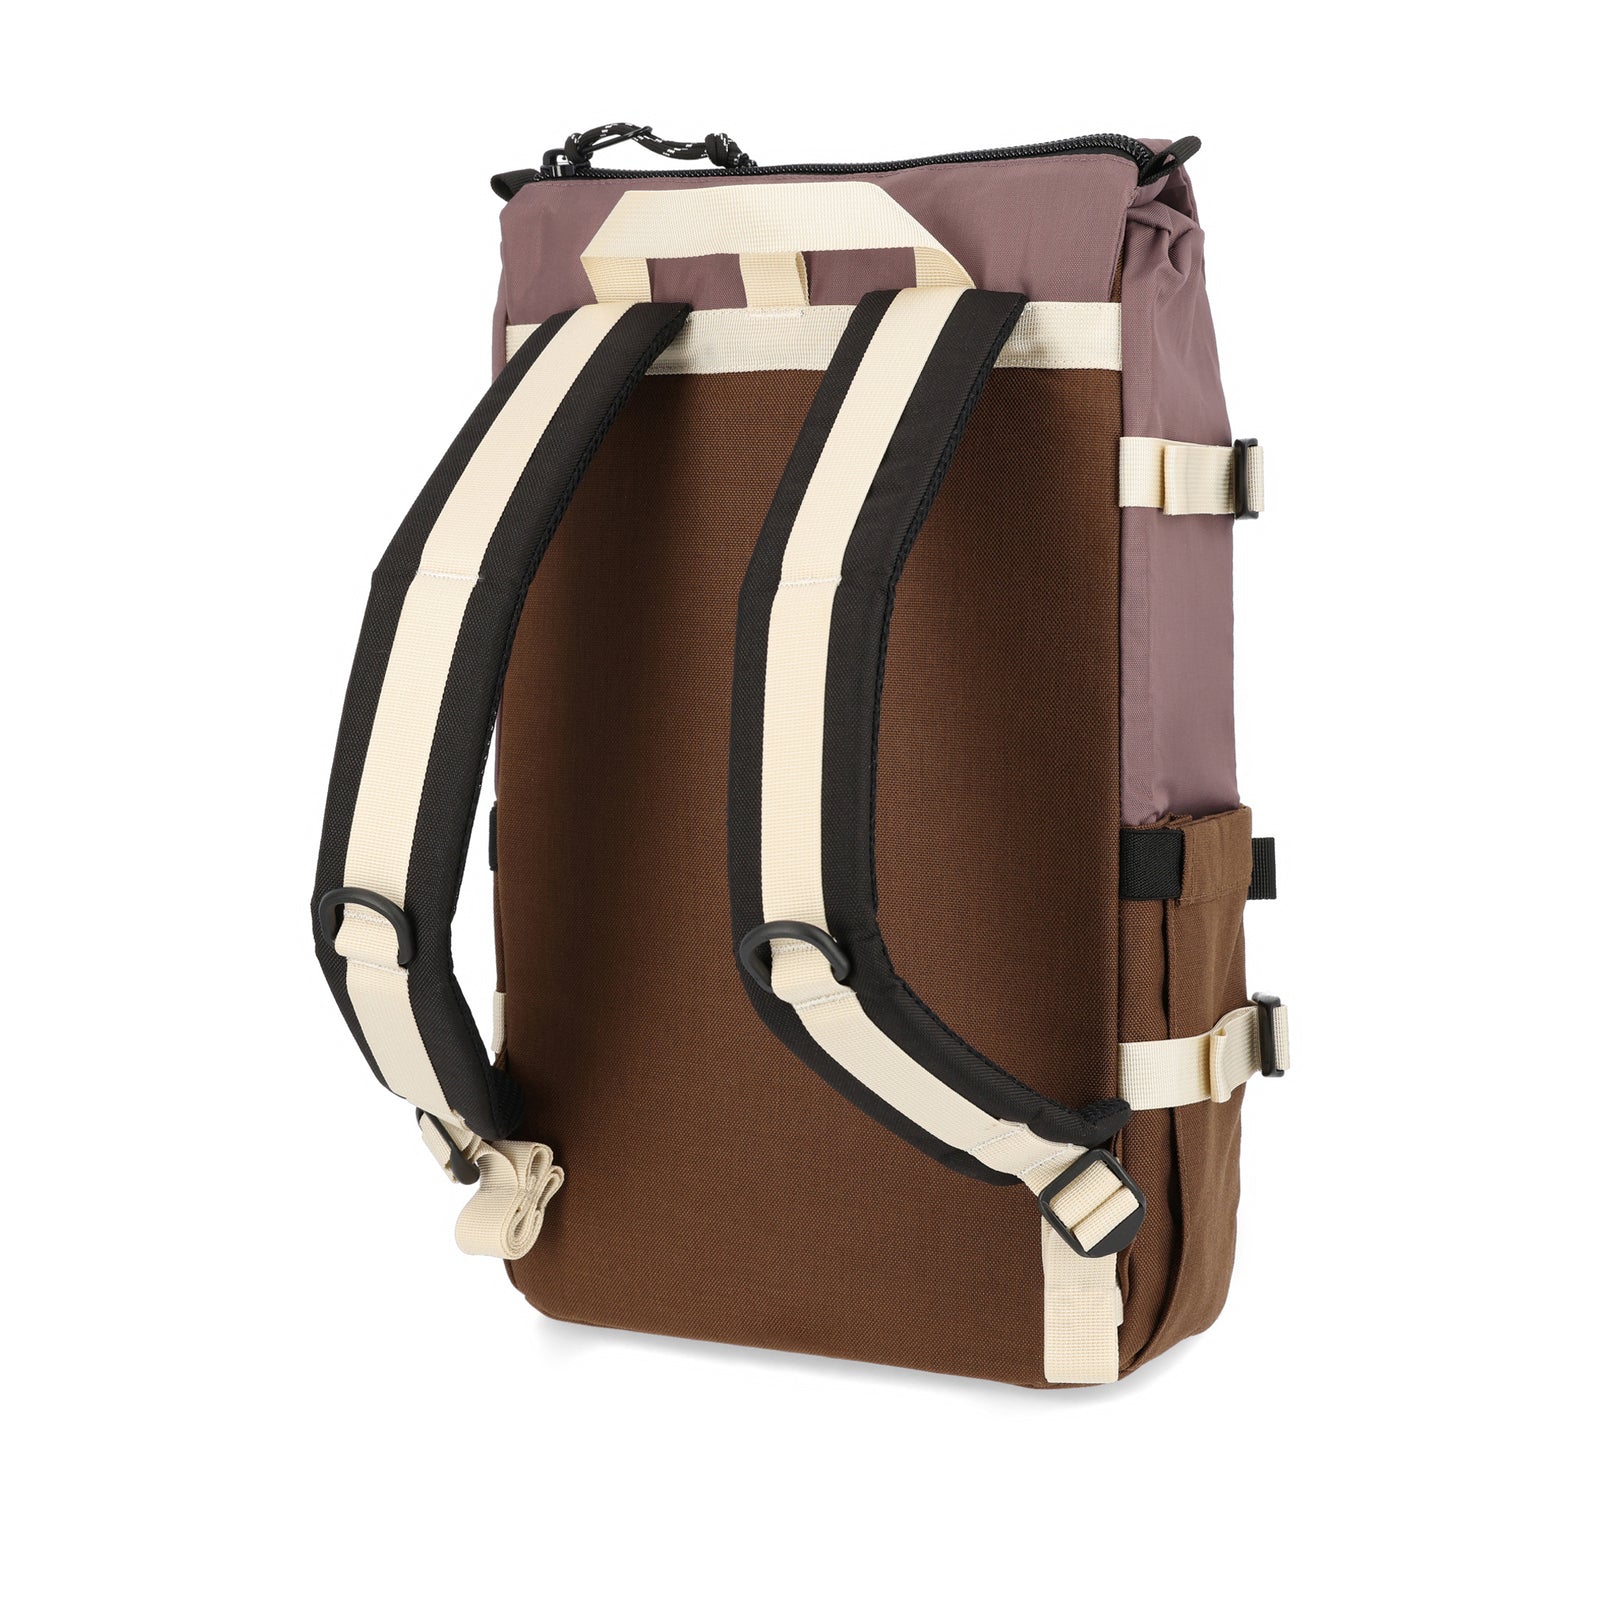 Back of Topo Designs Rover Pack Classic laptop backpack in recycled "Peppercorn / Cocoa" purple brown.